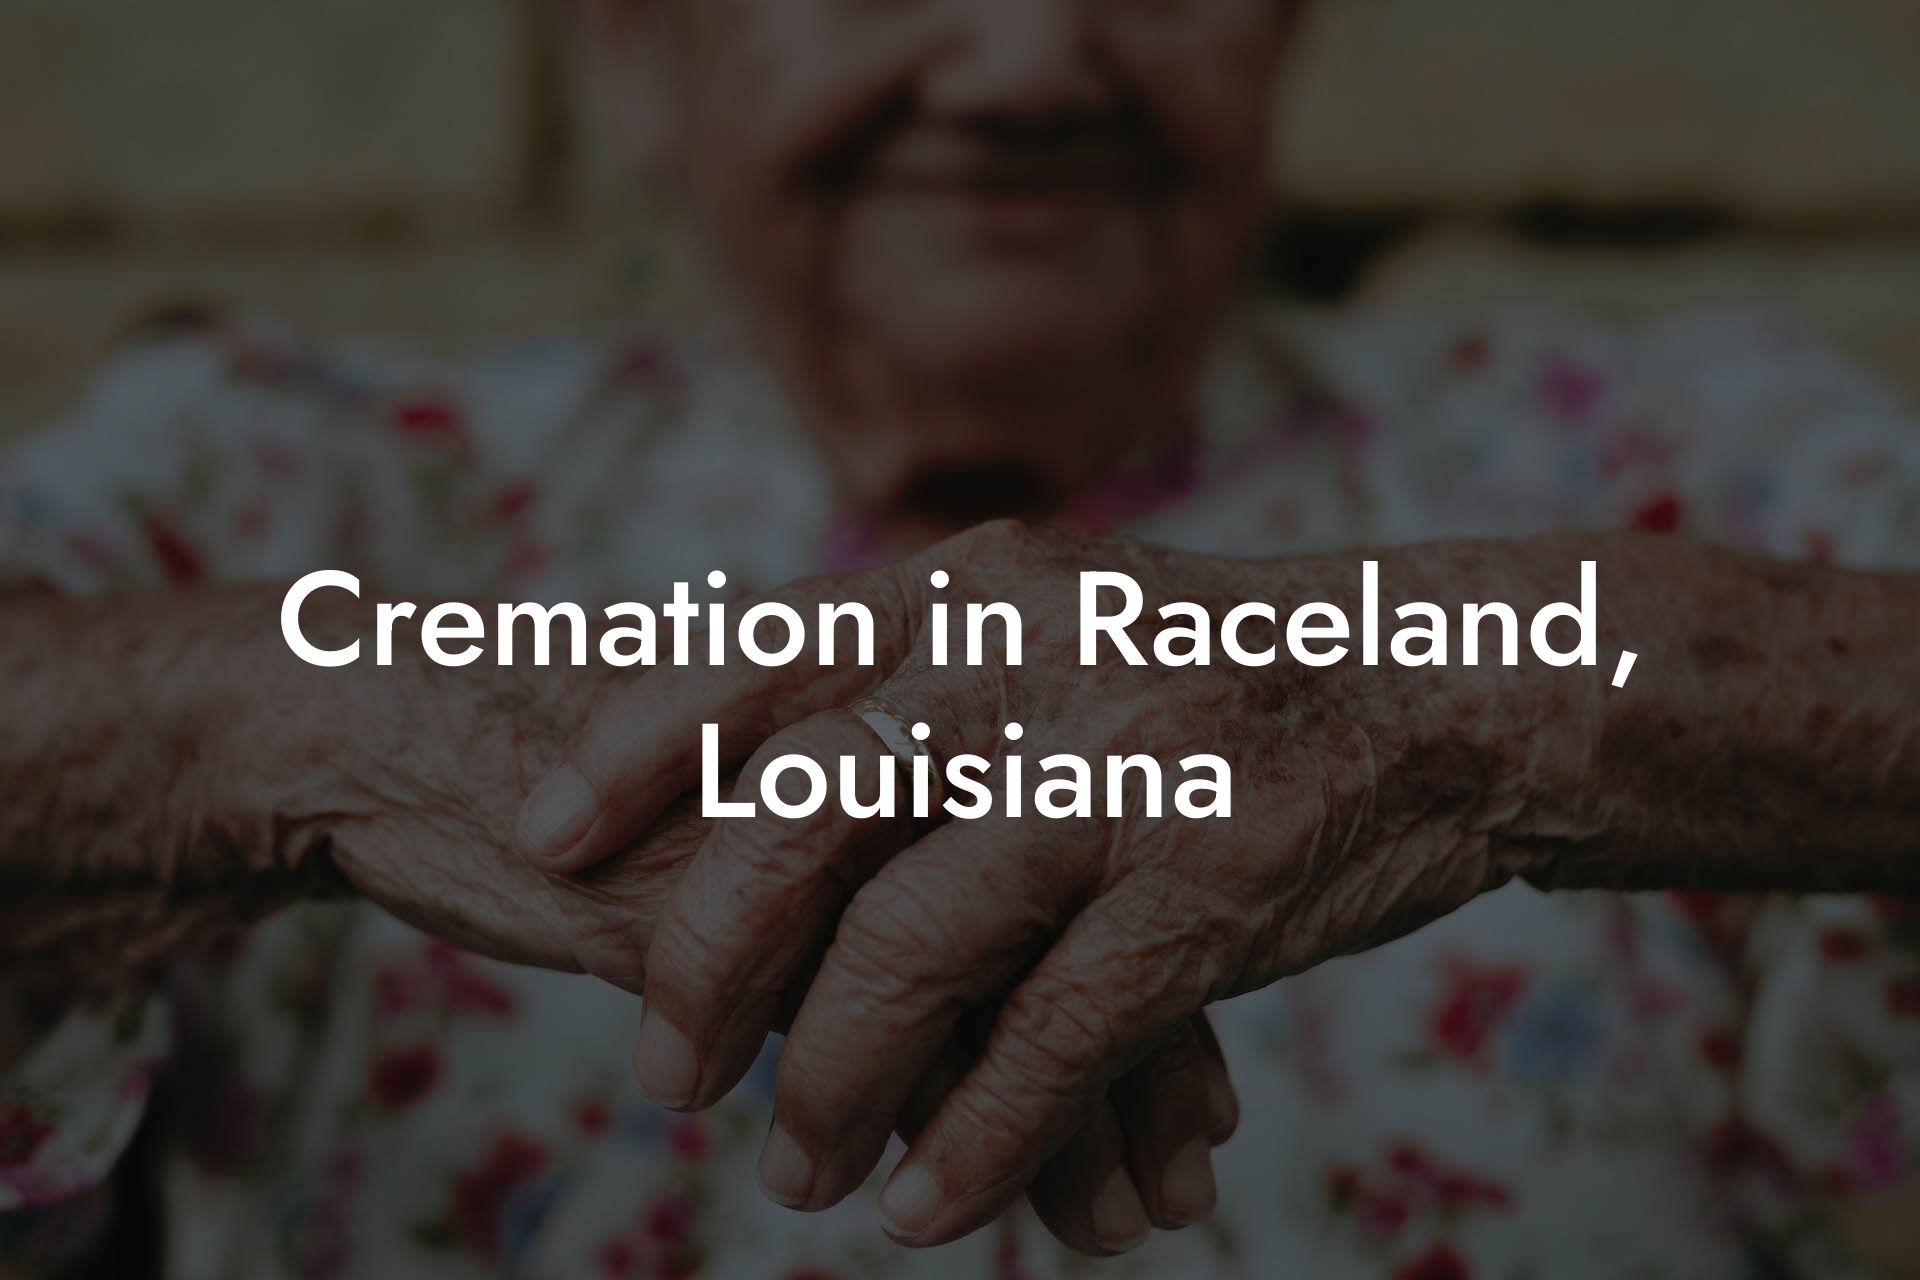 Cremation in Raceland, Louisiana